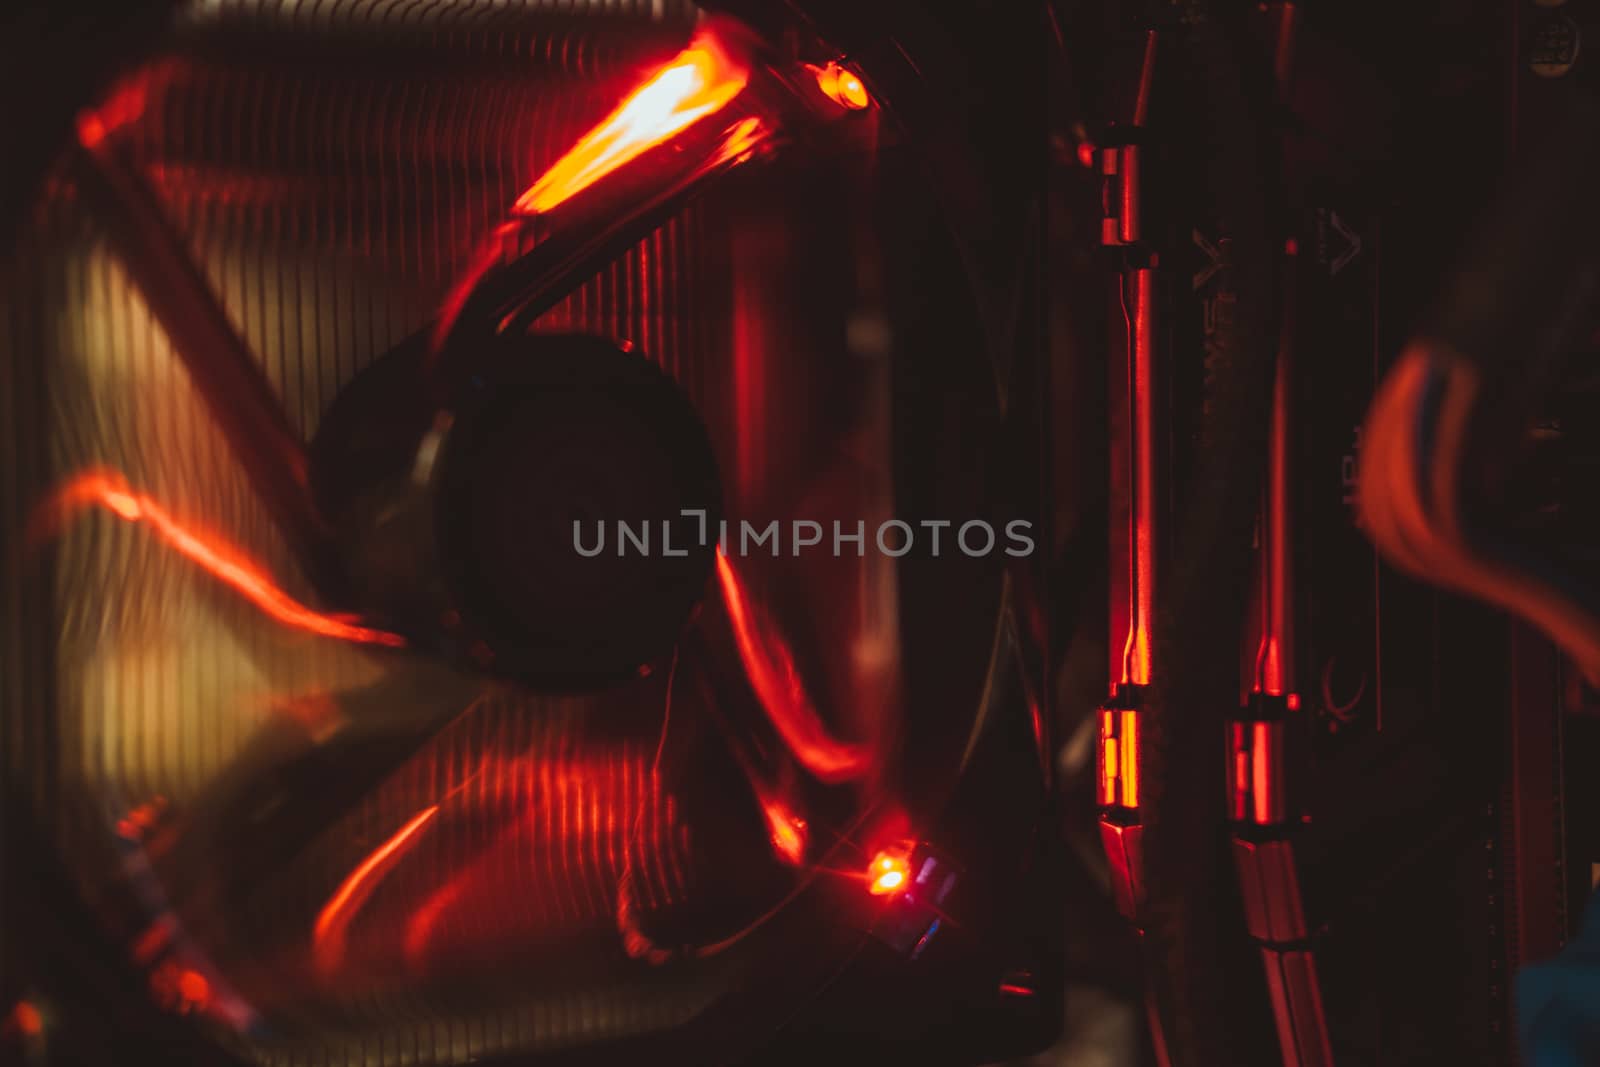 Computer fan and electronic components in red light from inside the tower. by mikelju